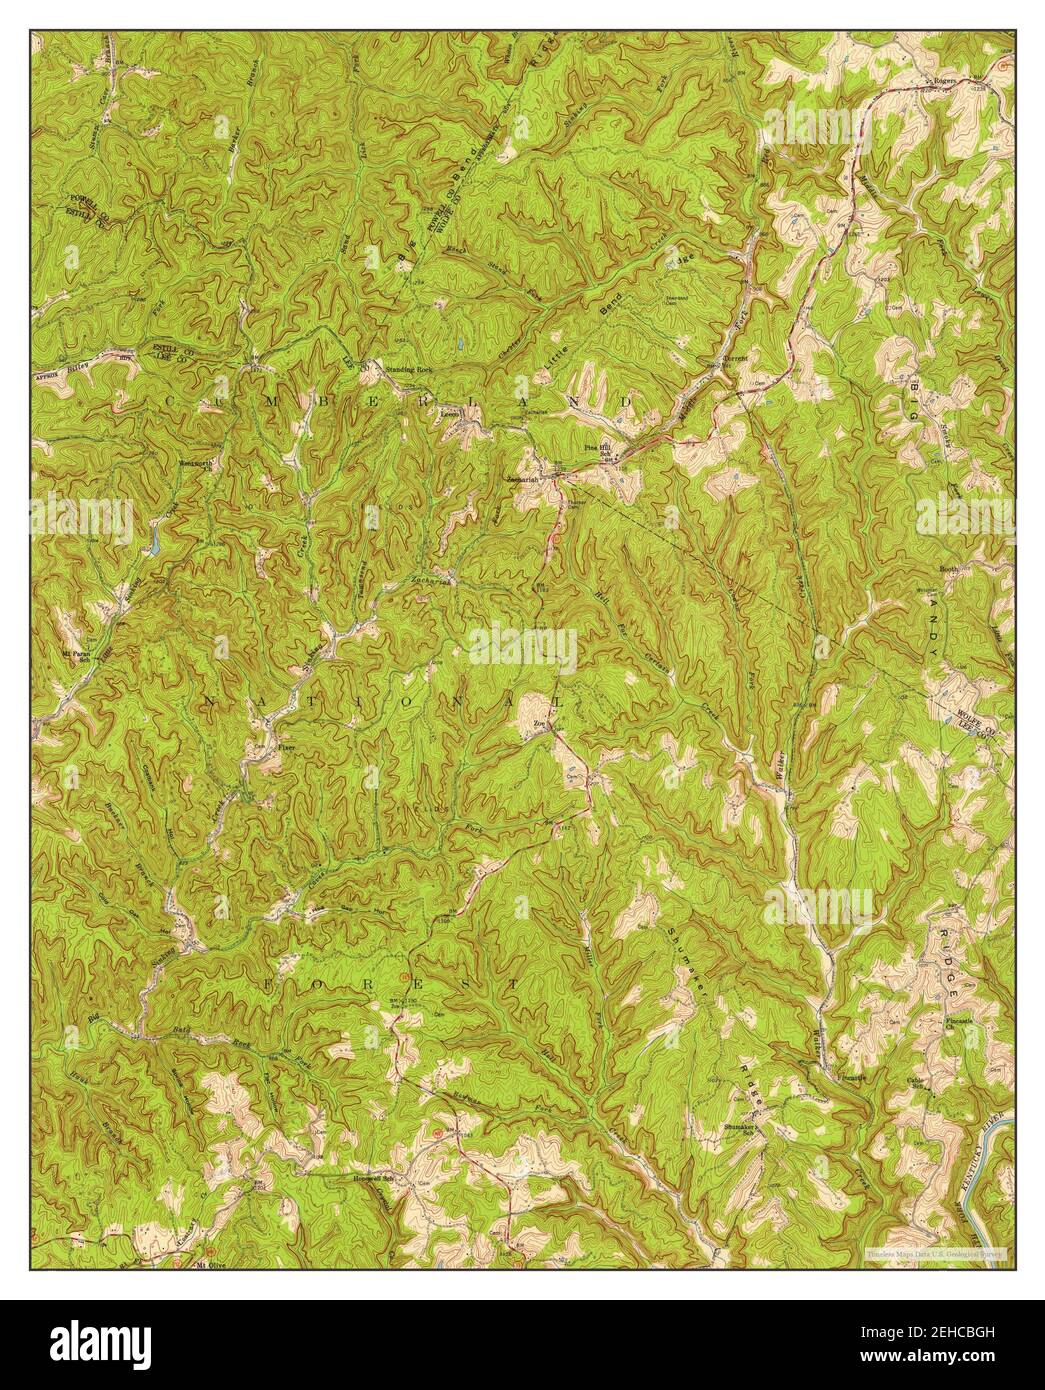 Zachariah, Kentucky, map 1953, 1:24000, United States of America by Timeless Maps, data U.S. Geological Survey Stock Photo